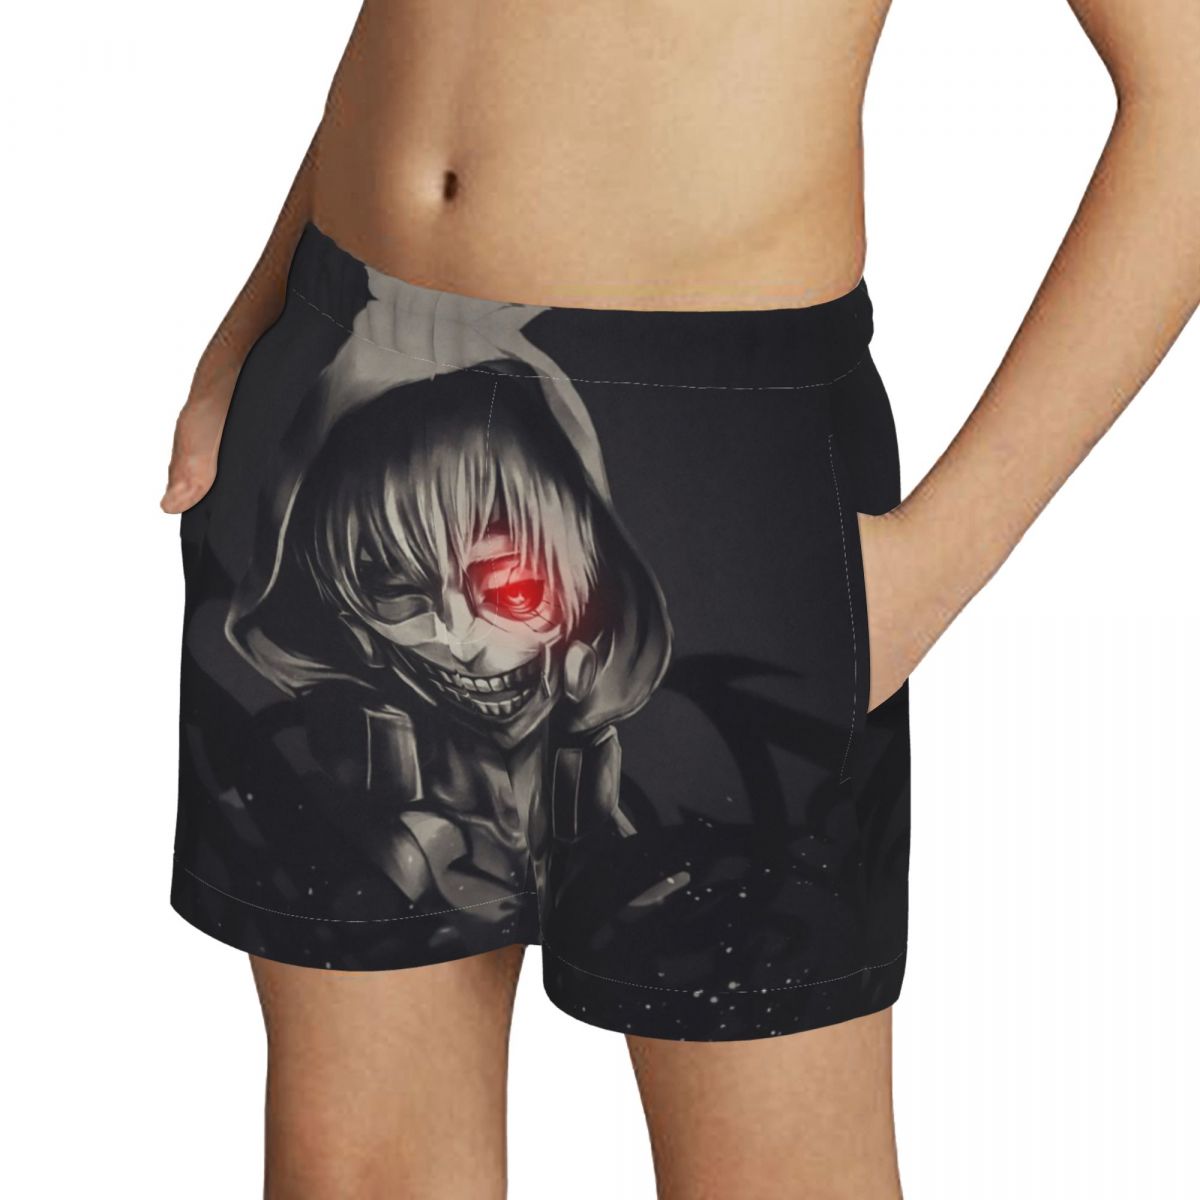 Tokyo Ghoul Shorts boy Quick Dry Swimwear Swimsuits Swim Boxer Trunks Surf Board Shorts With belt 2 - Anime Swimsuits